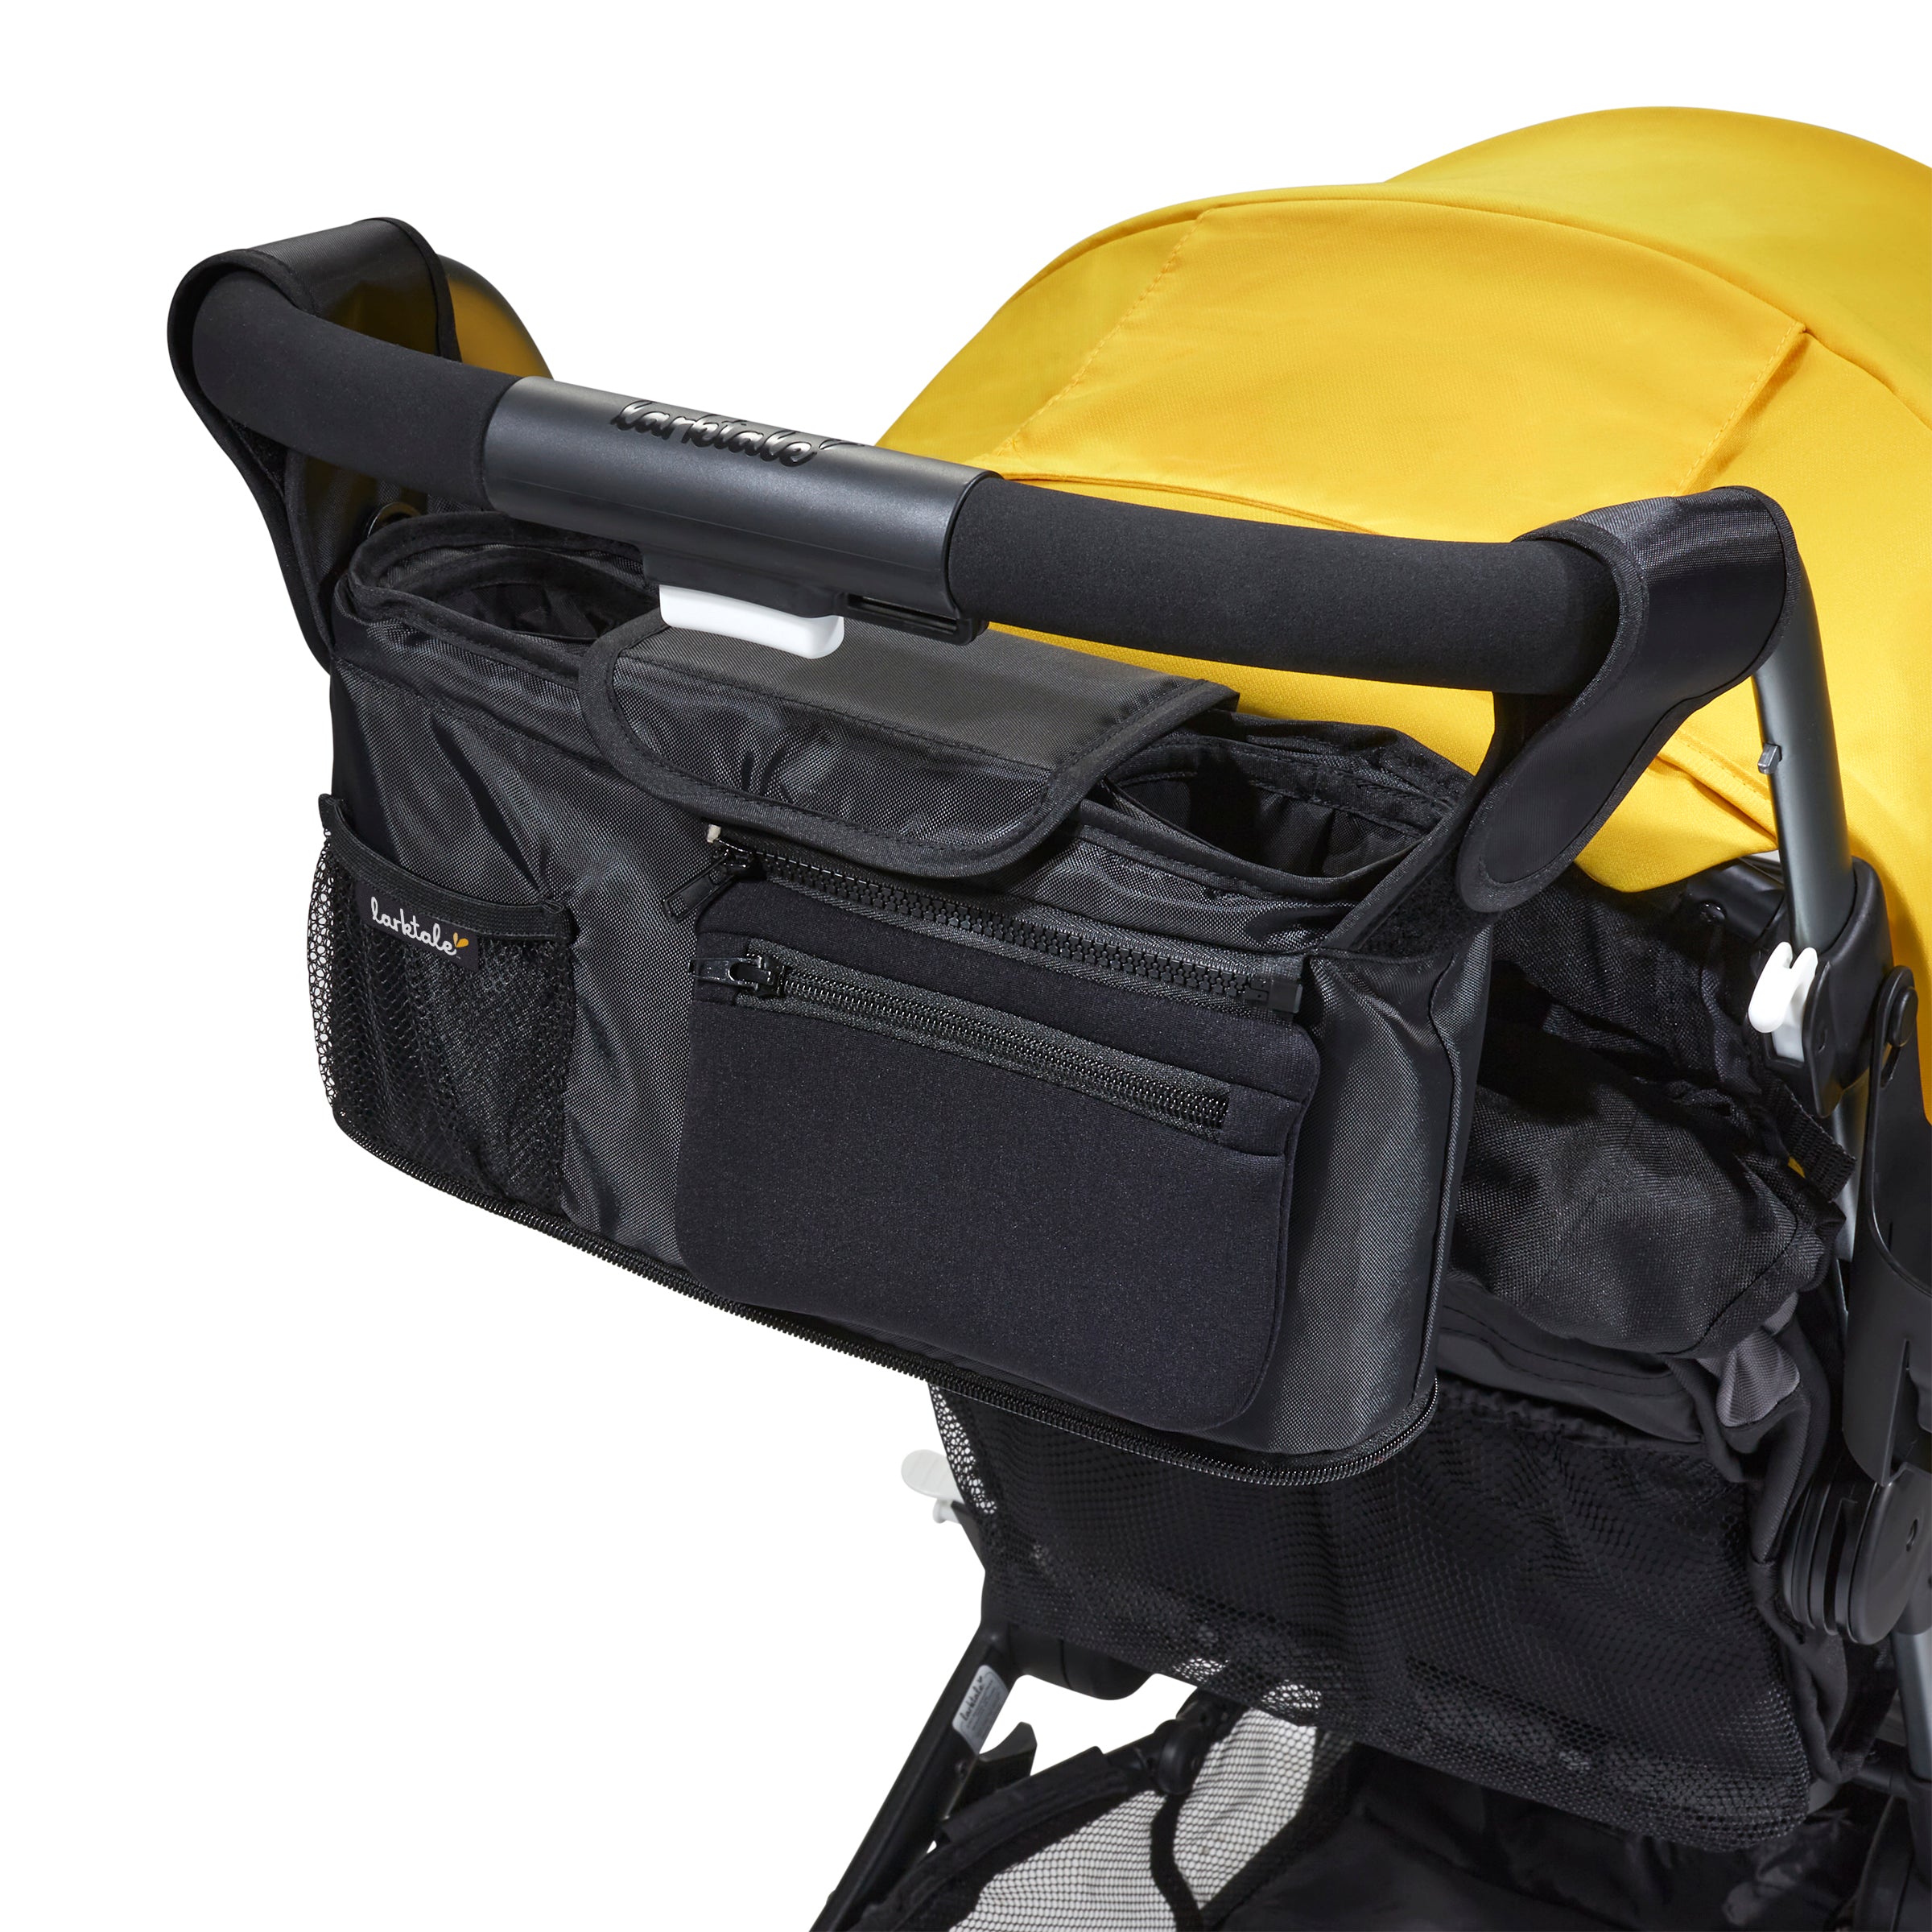 remove the cooler pouch to use just the parent console on your stroller handlebar